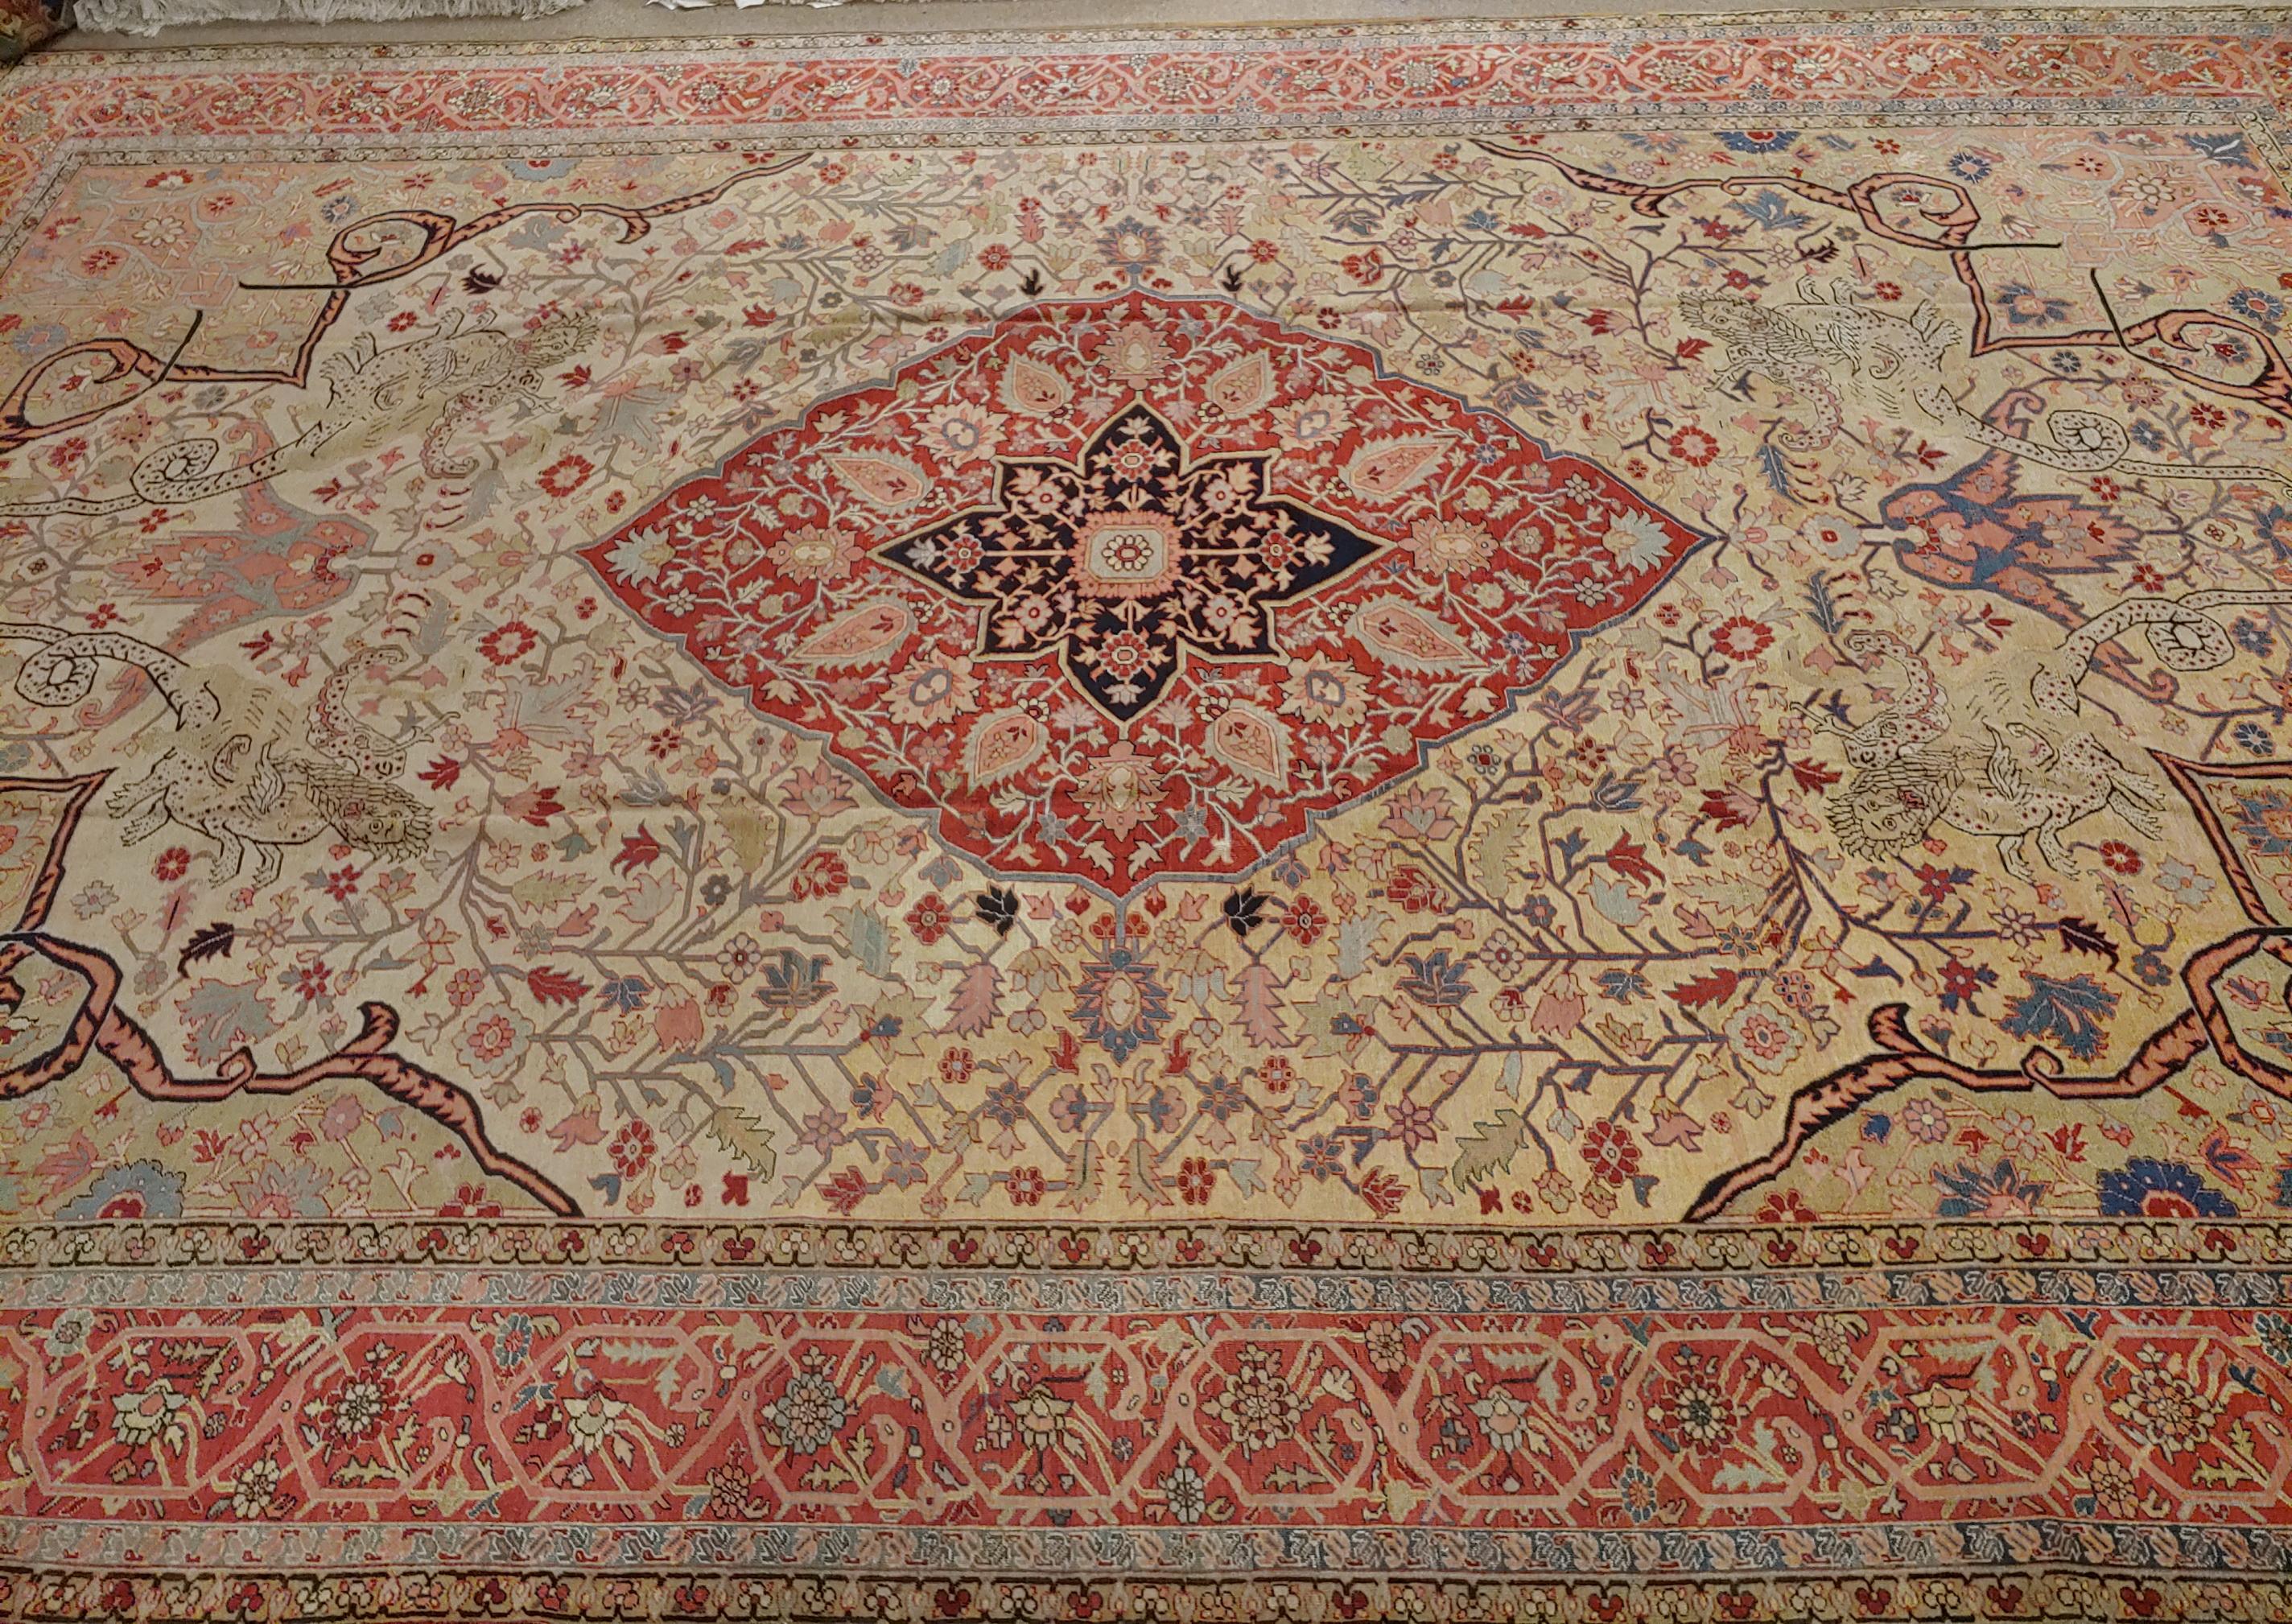 This is a rare antique Persian Serapi. While it appears to have a traditional motif, part of the field designs depicts four mythalogical dragons or snakes with the face of humans this is a very decorative rug with great colors. It is 12-3 x 19-3,